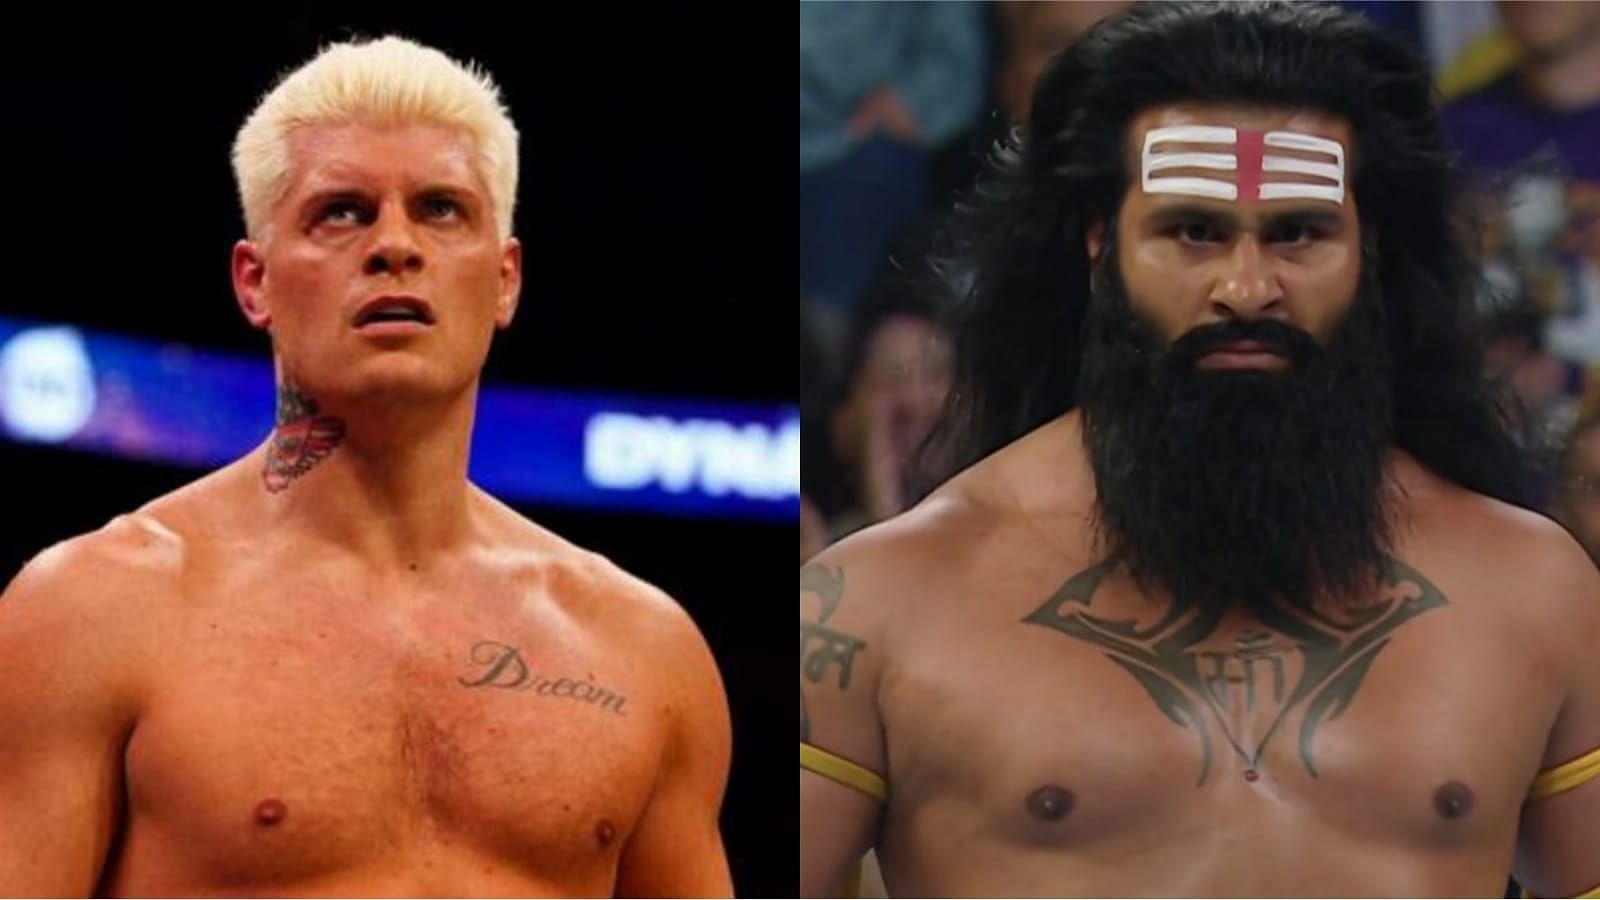 Cody Rhodes and Veer Mahaan have been unstoppable on Monday Night RAW